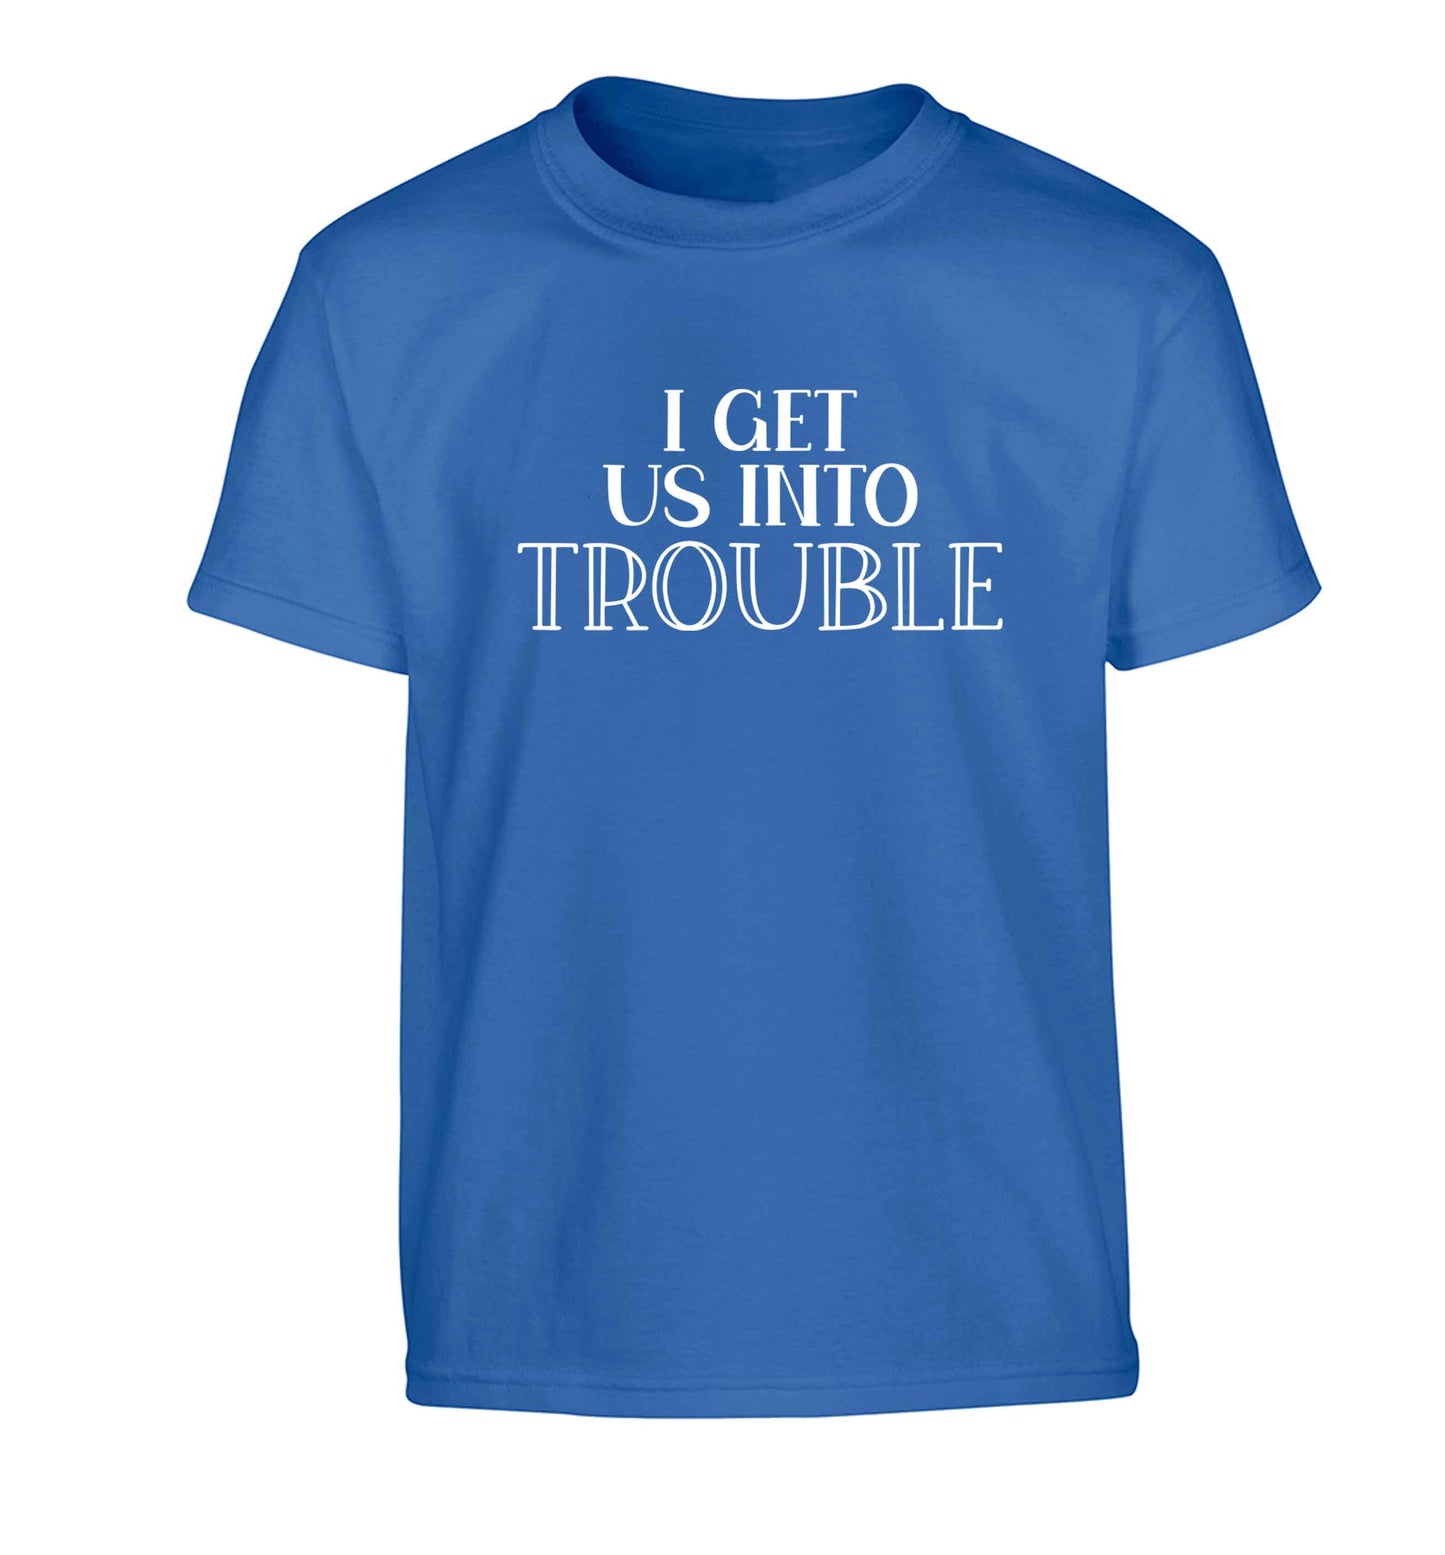 I get us into trouble Children's blue Tshirt 12-13 Years